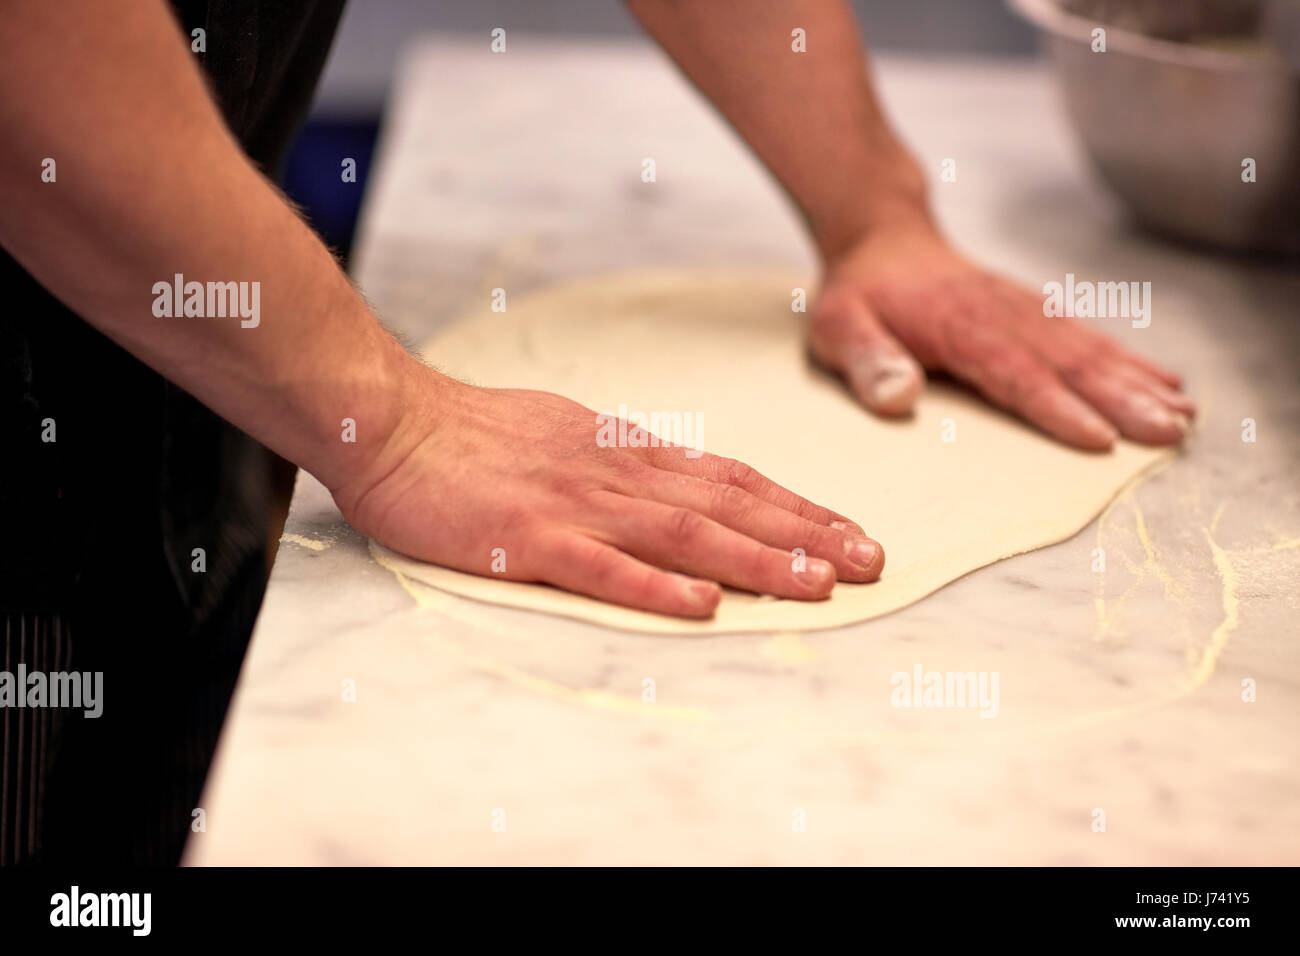 chef hands preparing dough on table at kitchen Stock Photo